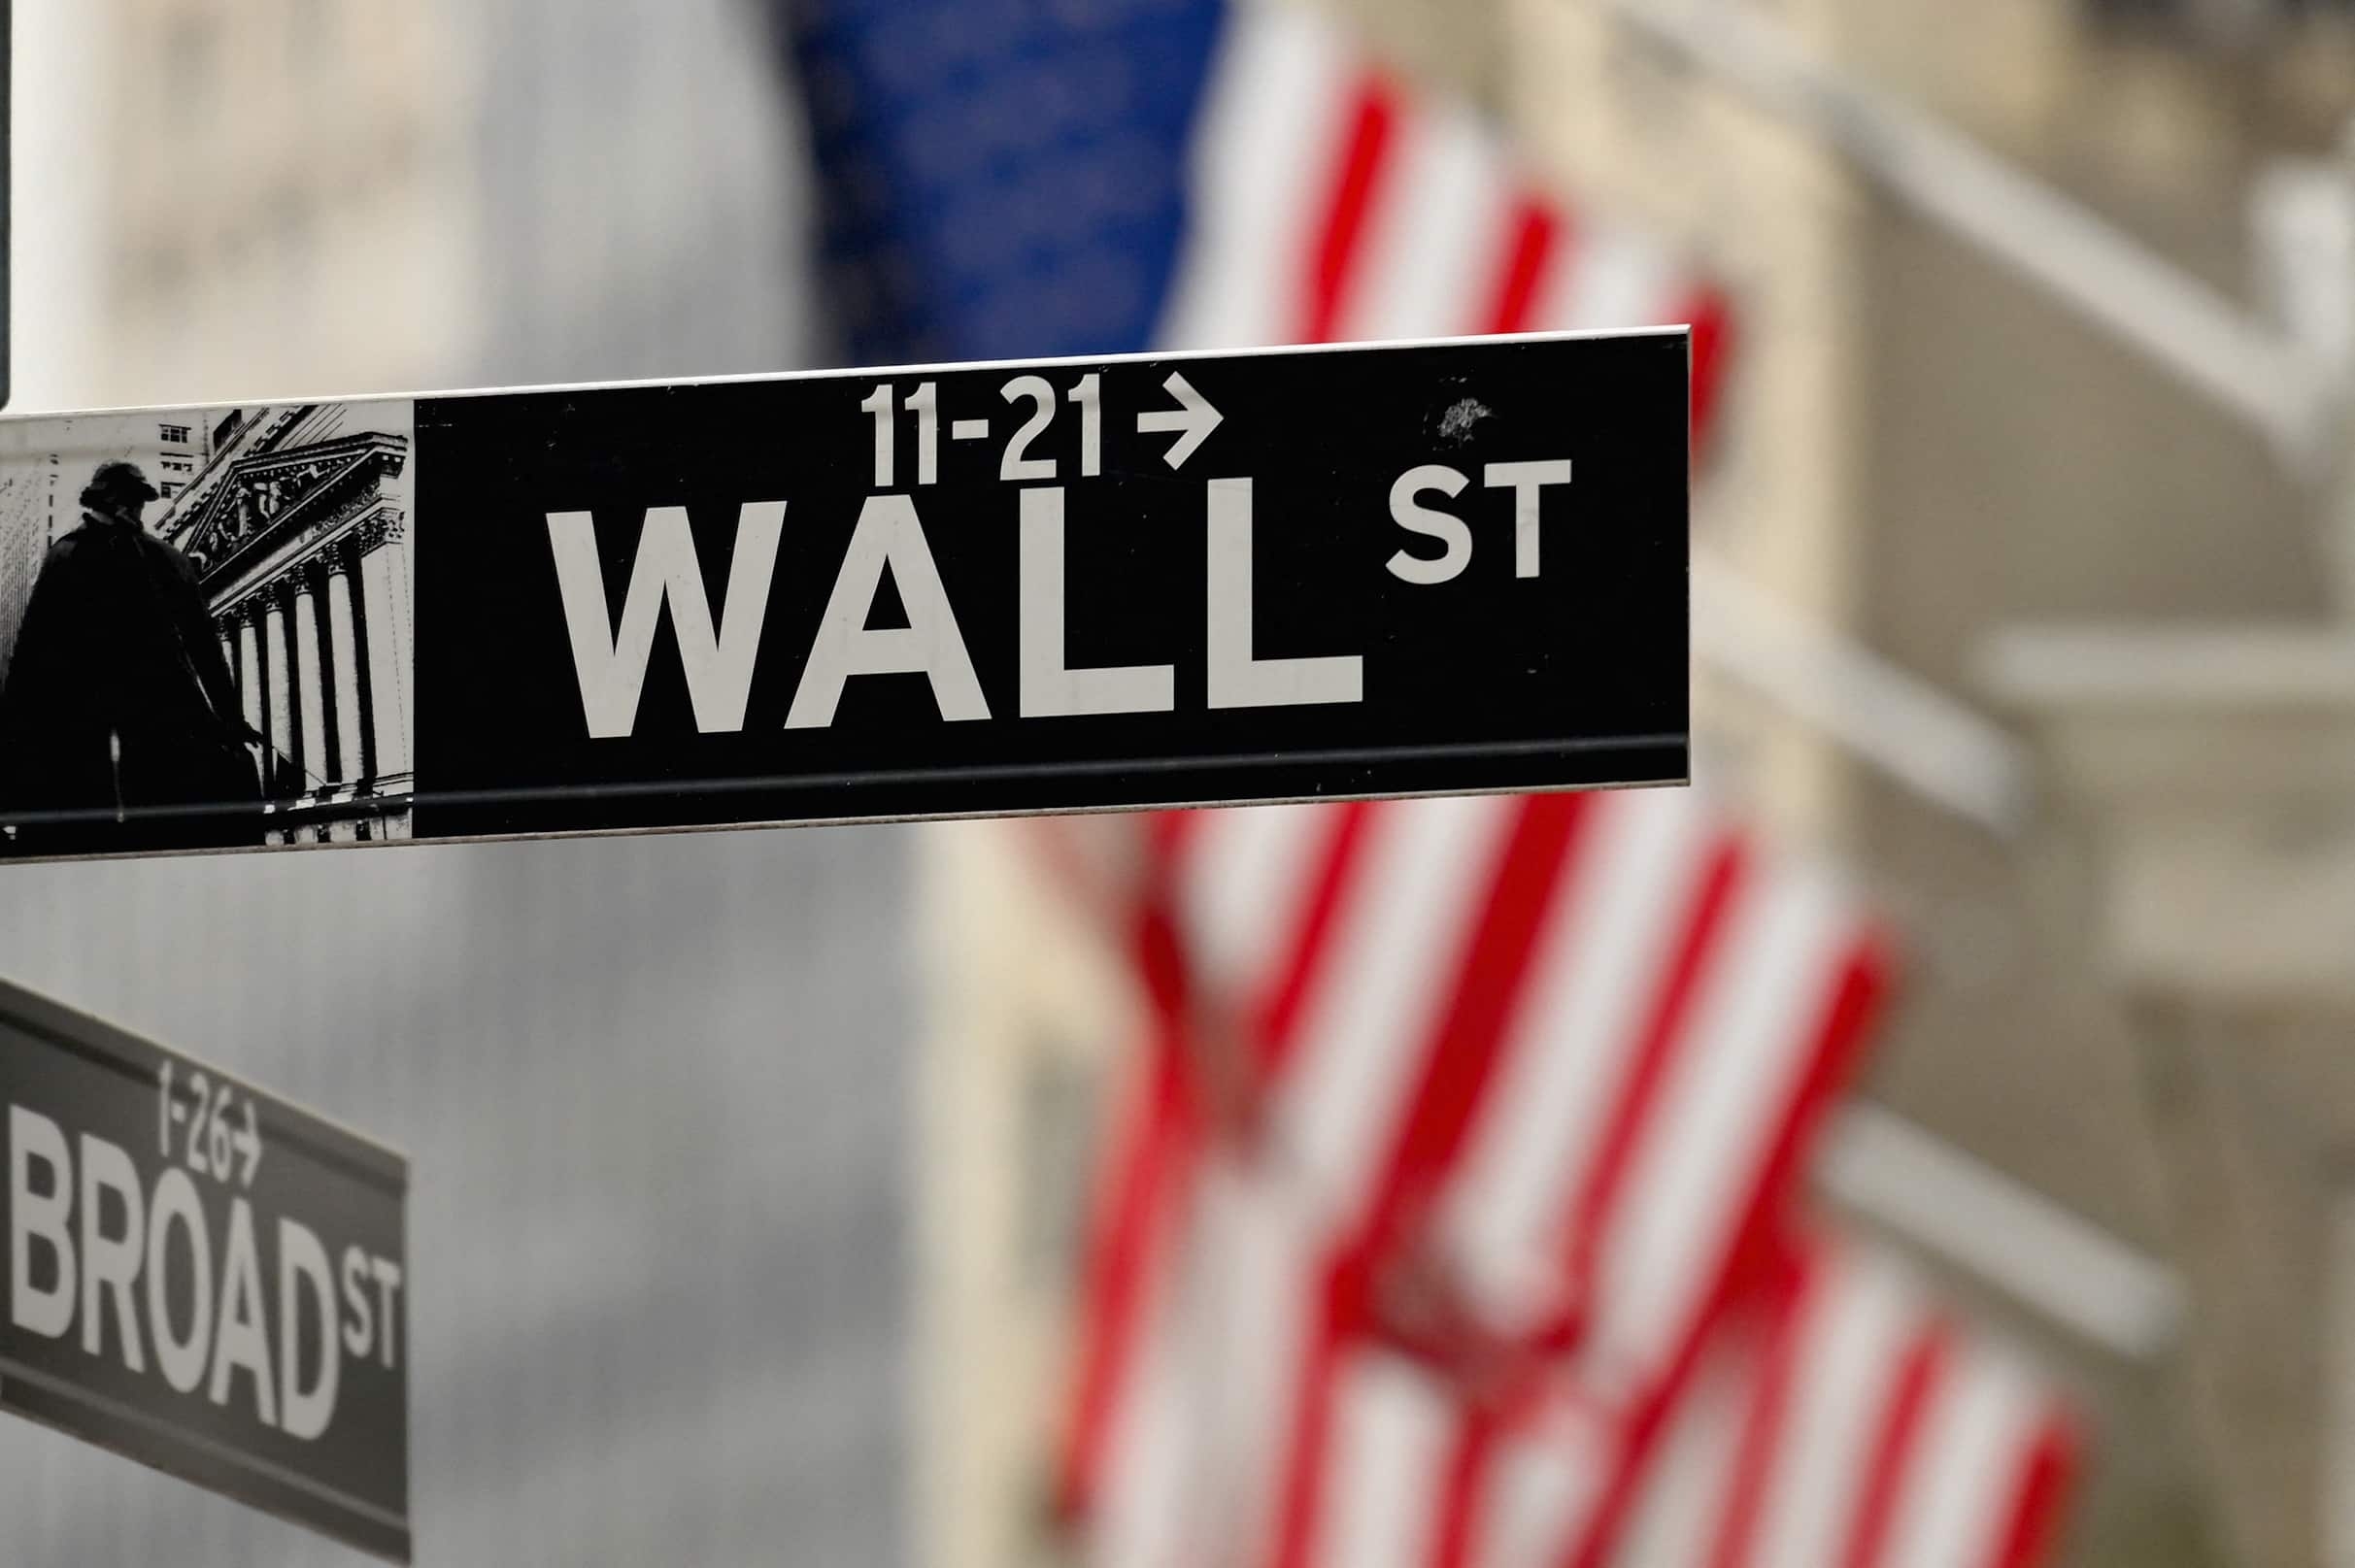 Wall Street's three major indexes closed higher on Friday, with the biggest boost from recently battered technology stocks, after talks between U.S. President Joe Biden and Chinese President Xi Jinping over the Ukraine crisis ended without big surprises. The Dow Jones Industrial Average rose 274.17 points, or 0.8%, to 34,754.93, the S&amp;P 500 gained 51.45 points, or 1.17%, to 4,463.12 and the Nasdaq Composite added 279.06 points, or 2.05%, to 13,893.84.